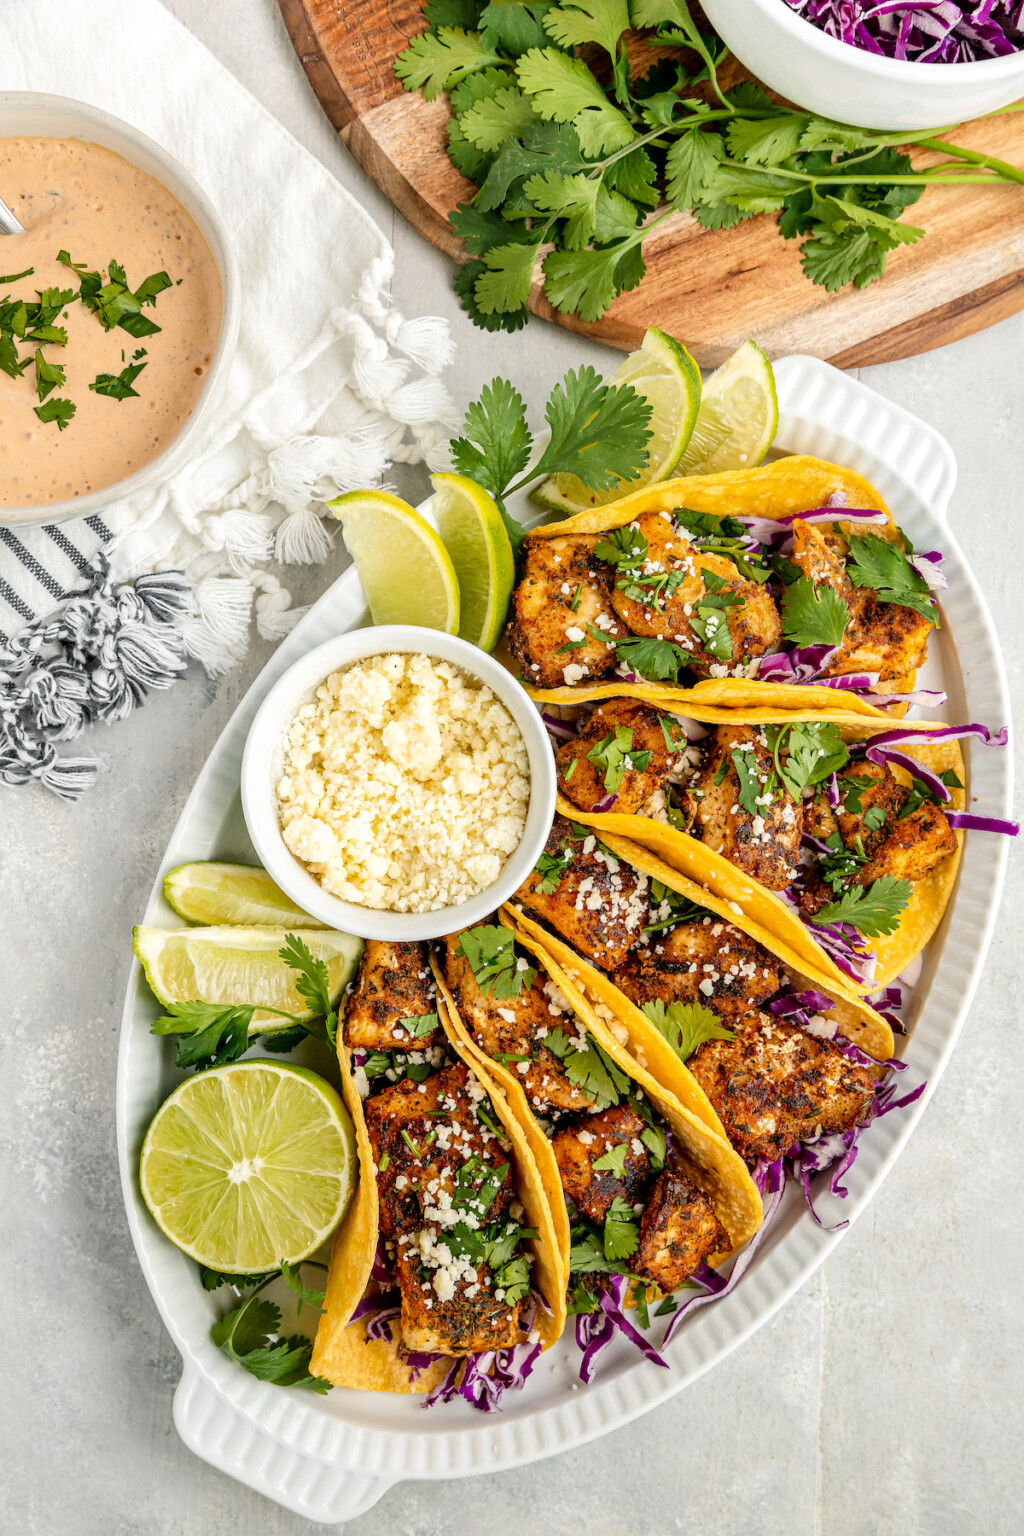 Blackened Fish Tacos With Chipotle-Lime Sauce | The Novice Chef